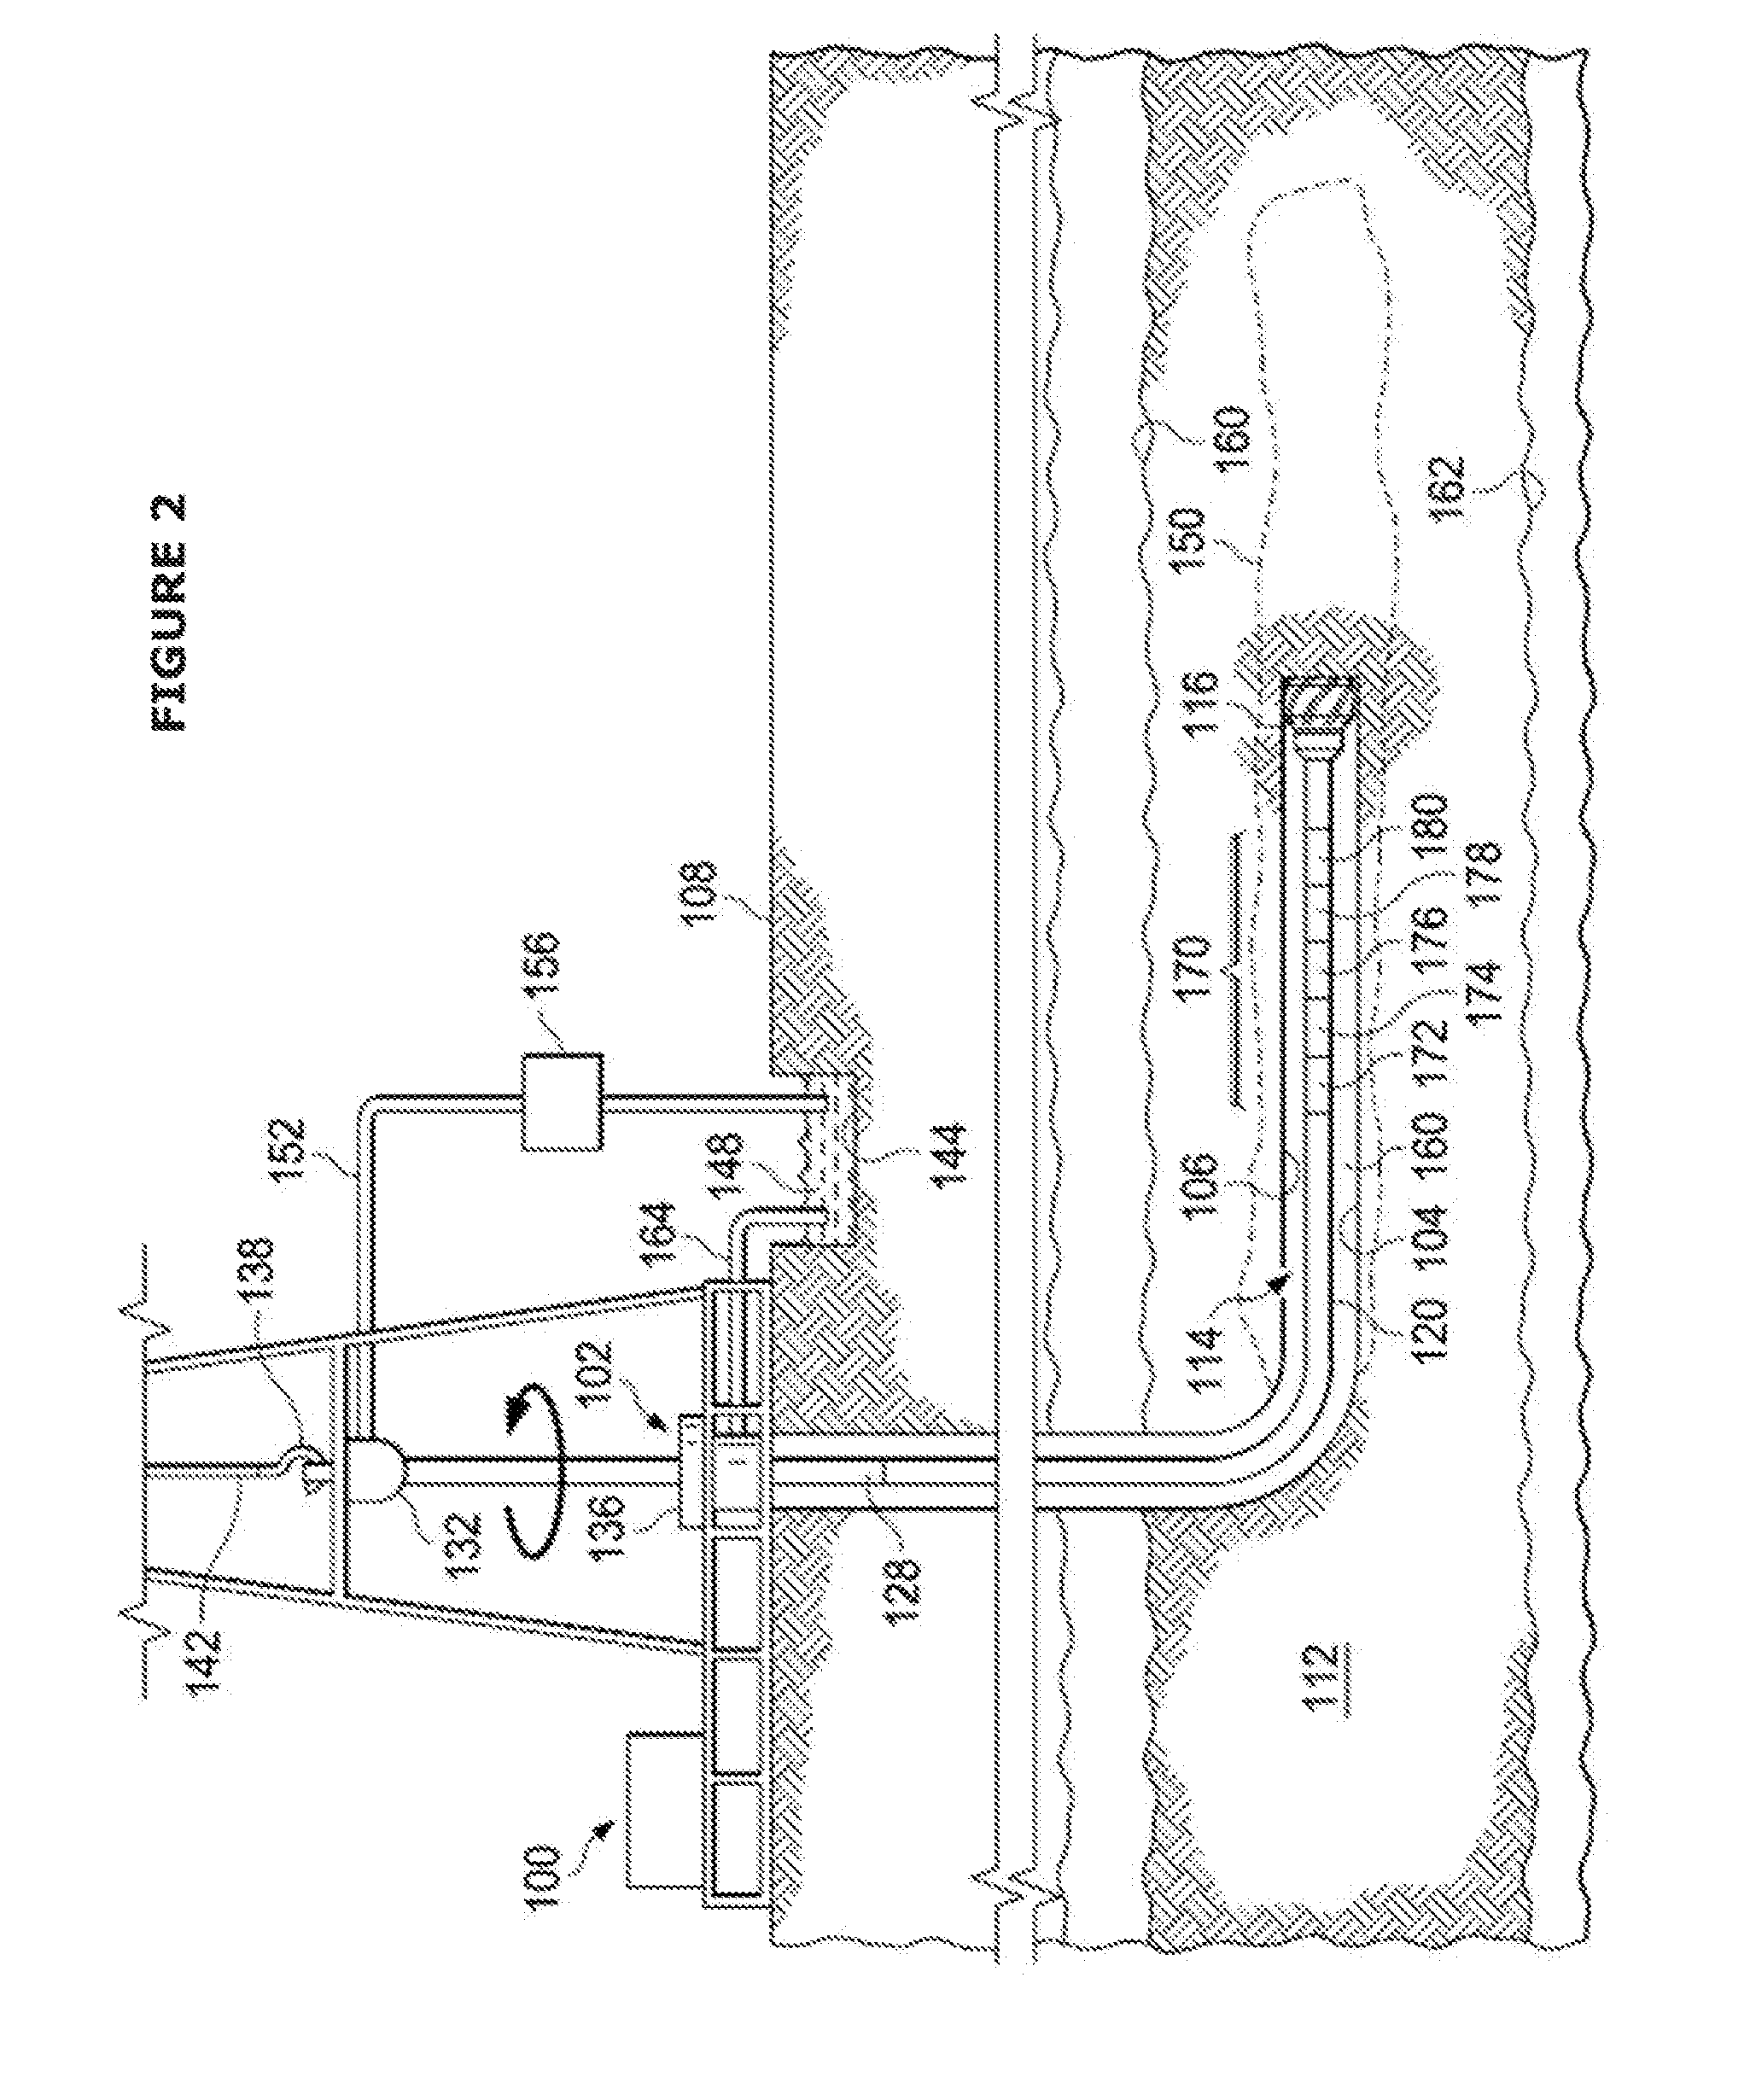 Method and Criteria for Trajectory Control